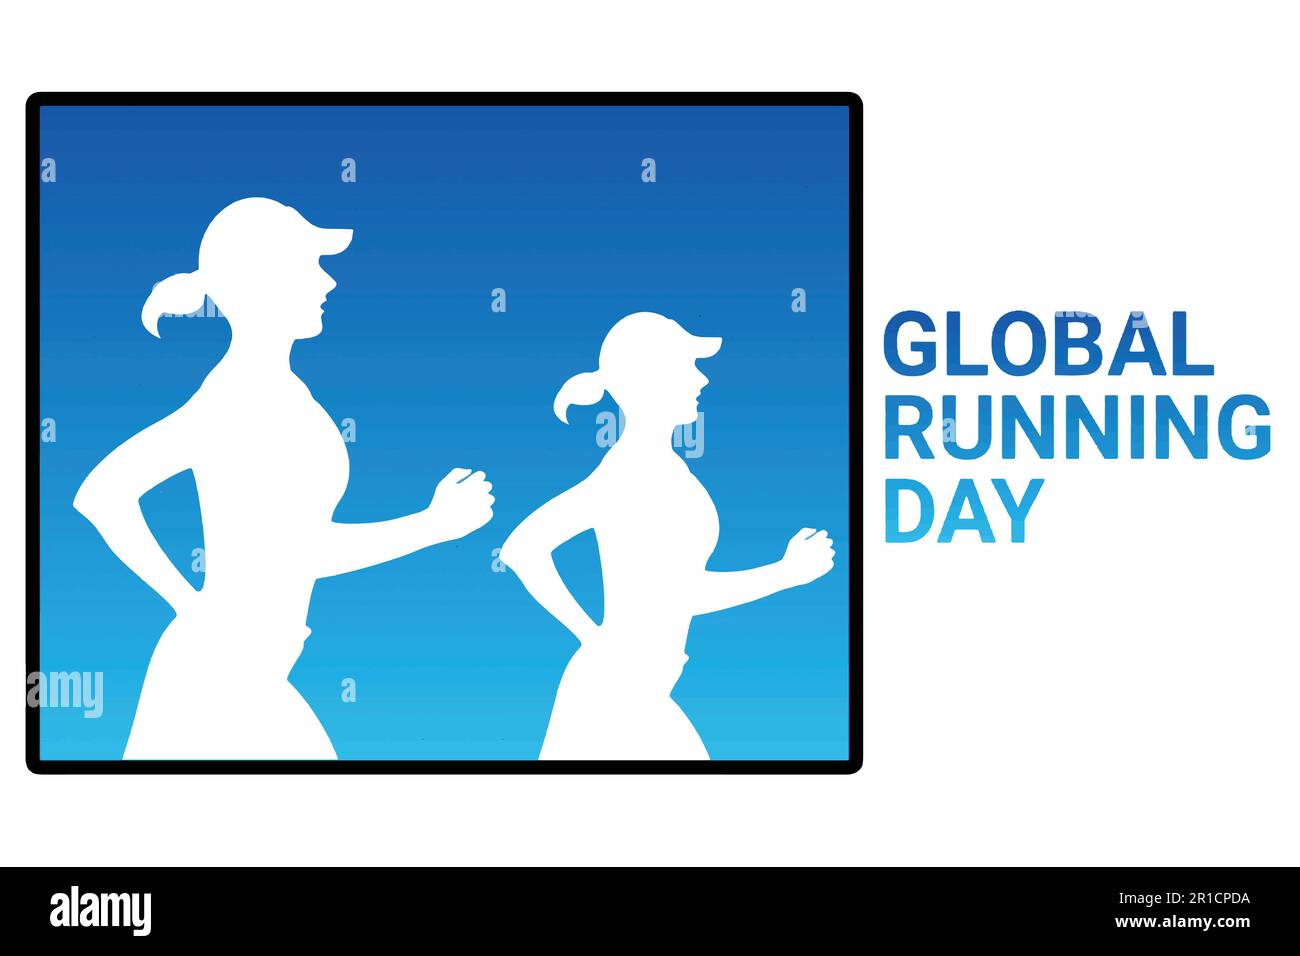 Global running day design, Vector illustration. Sport and healthy lifestyle theme. Stock Vector